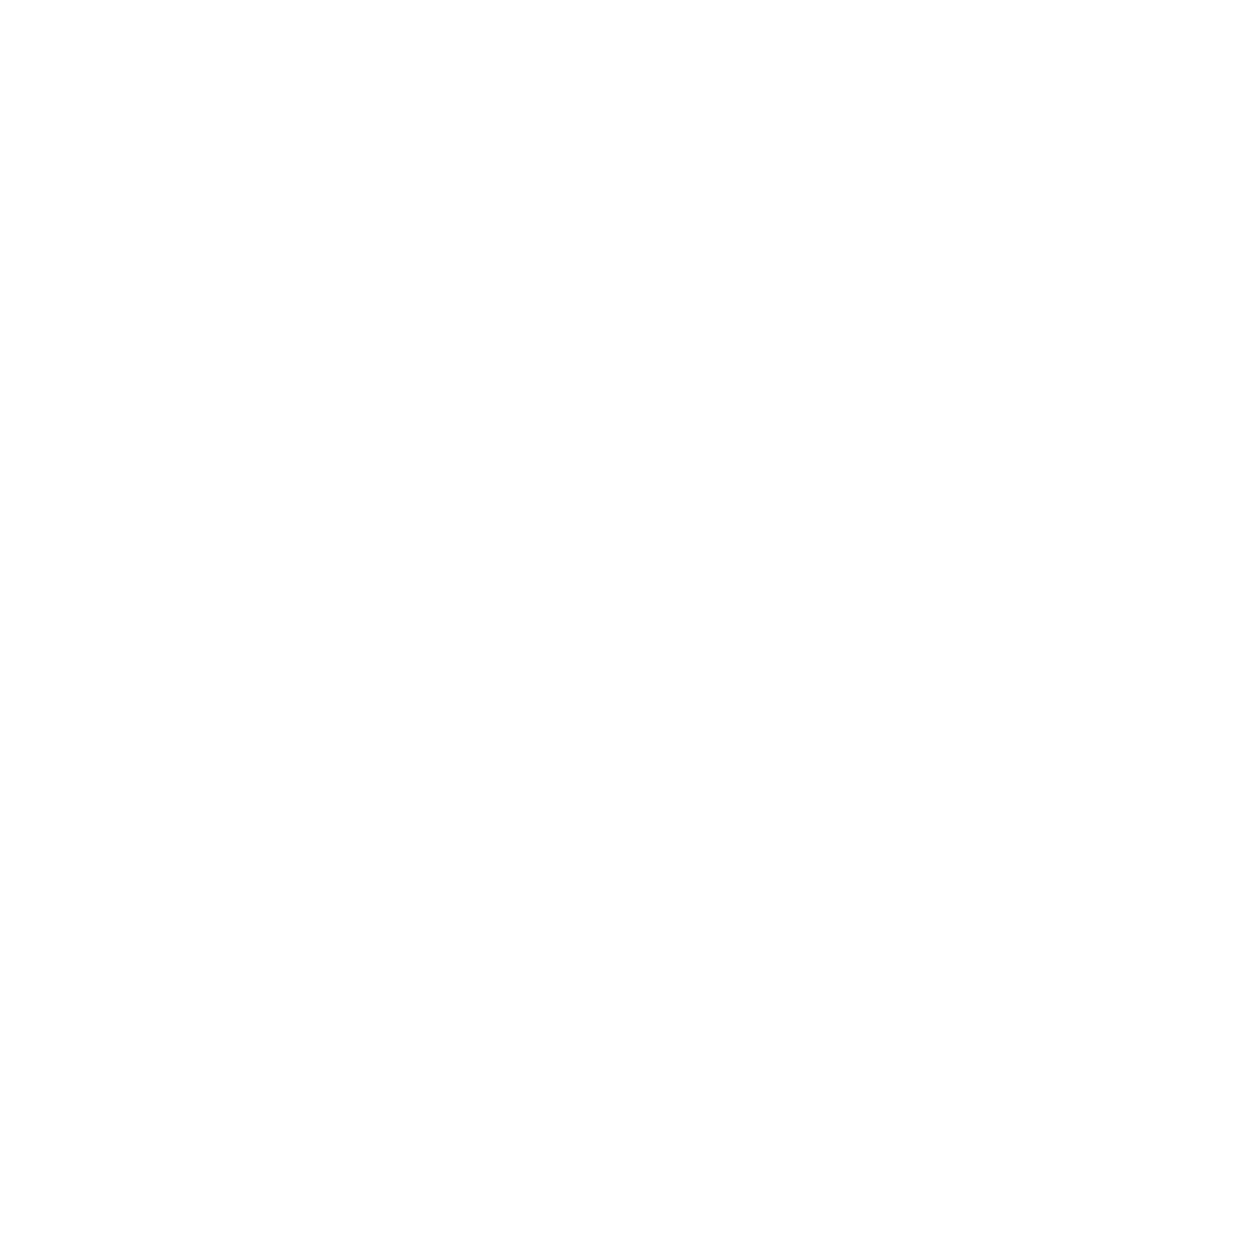 National Applied Research Laboratories